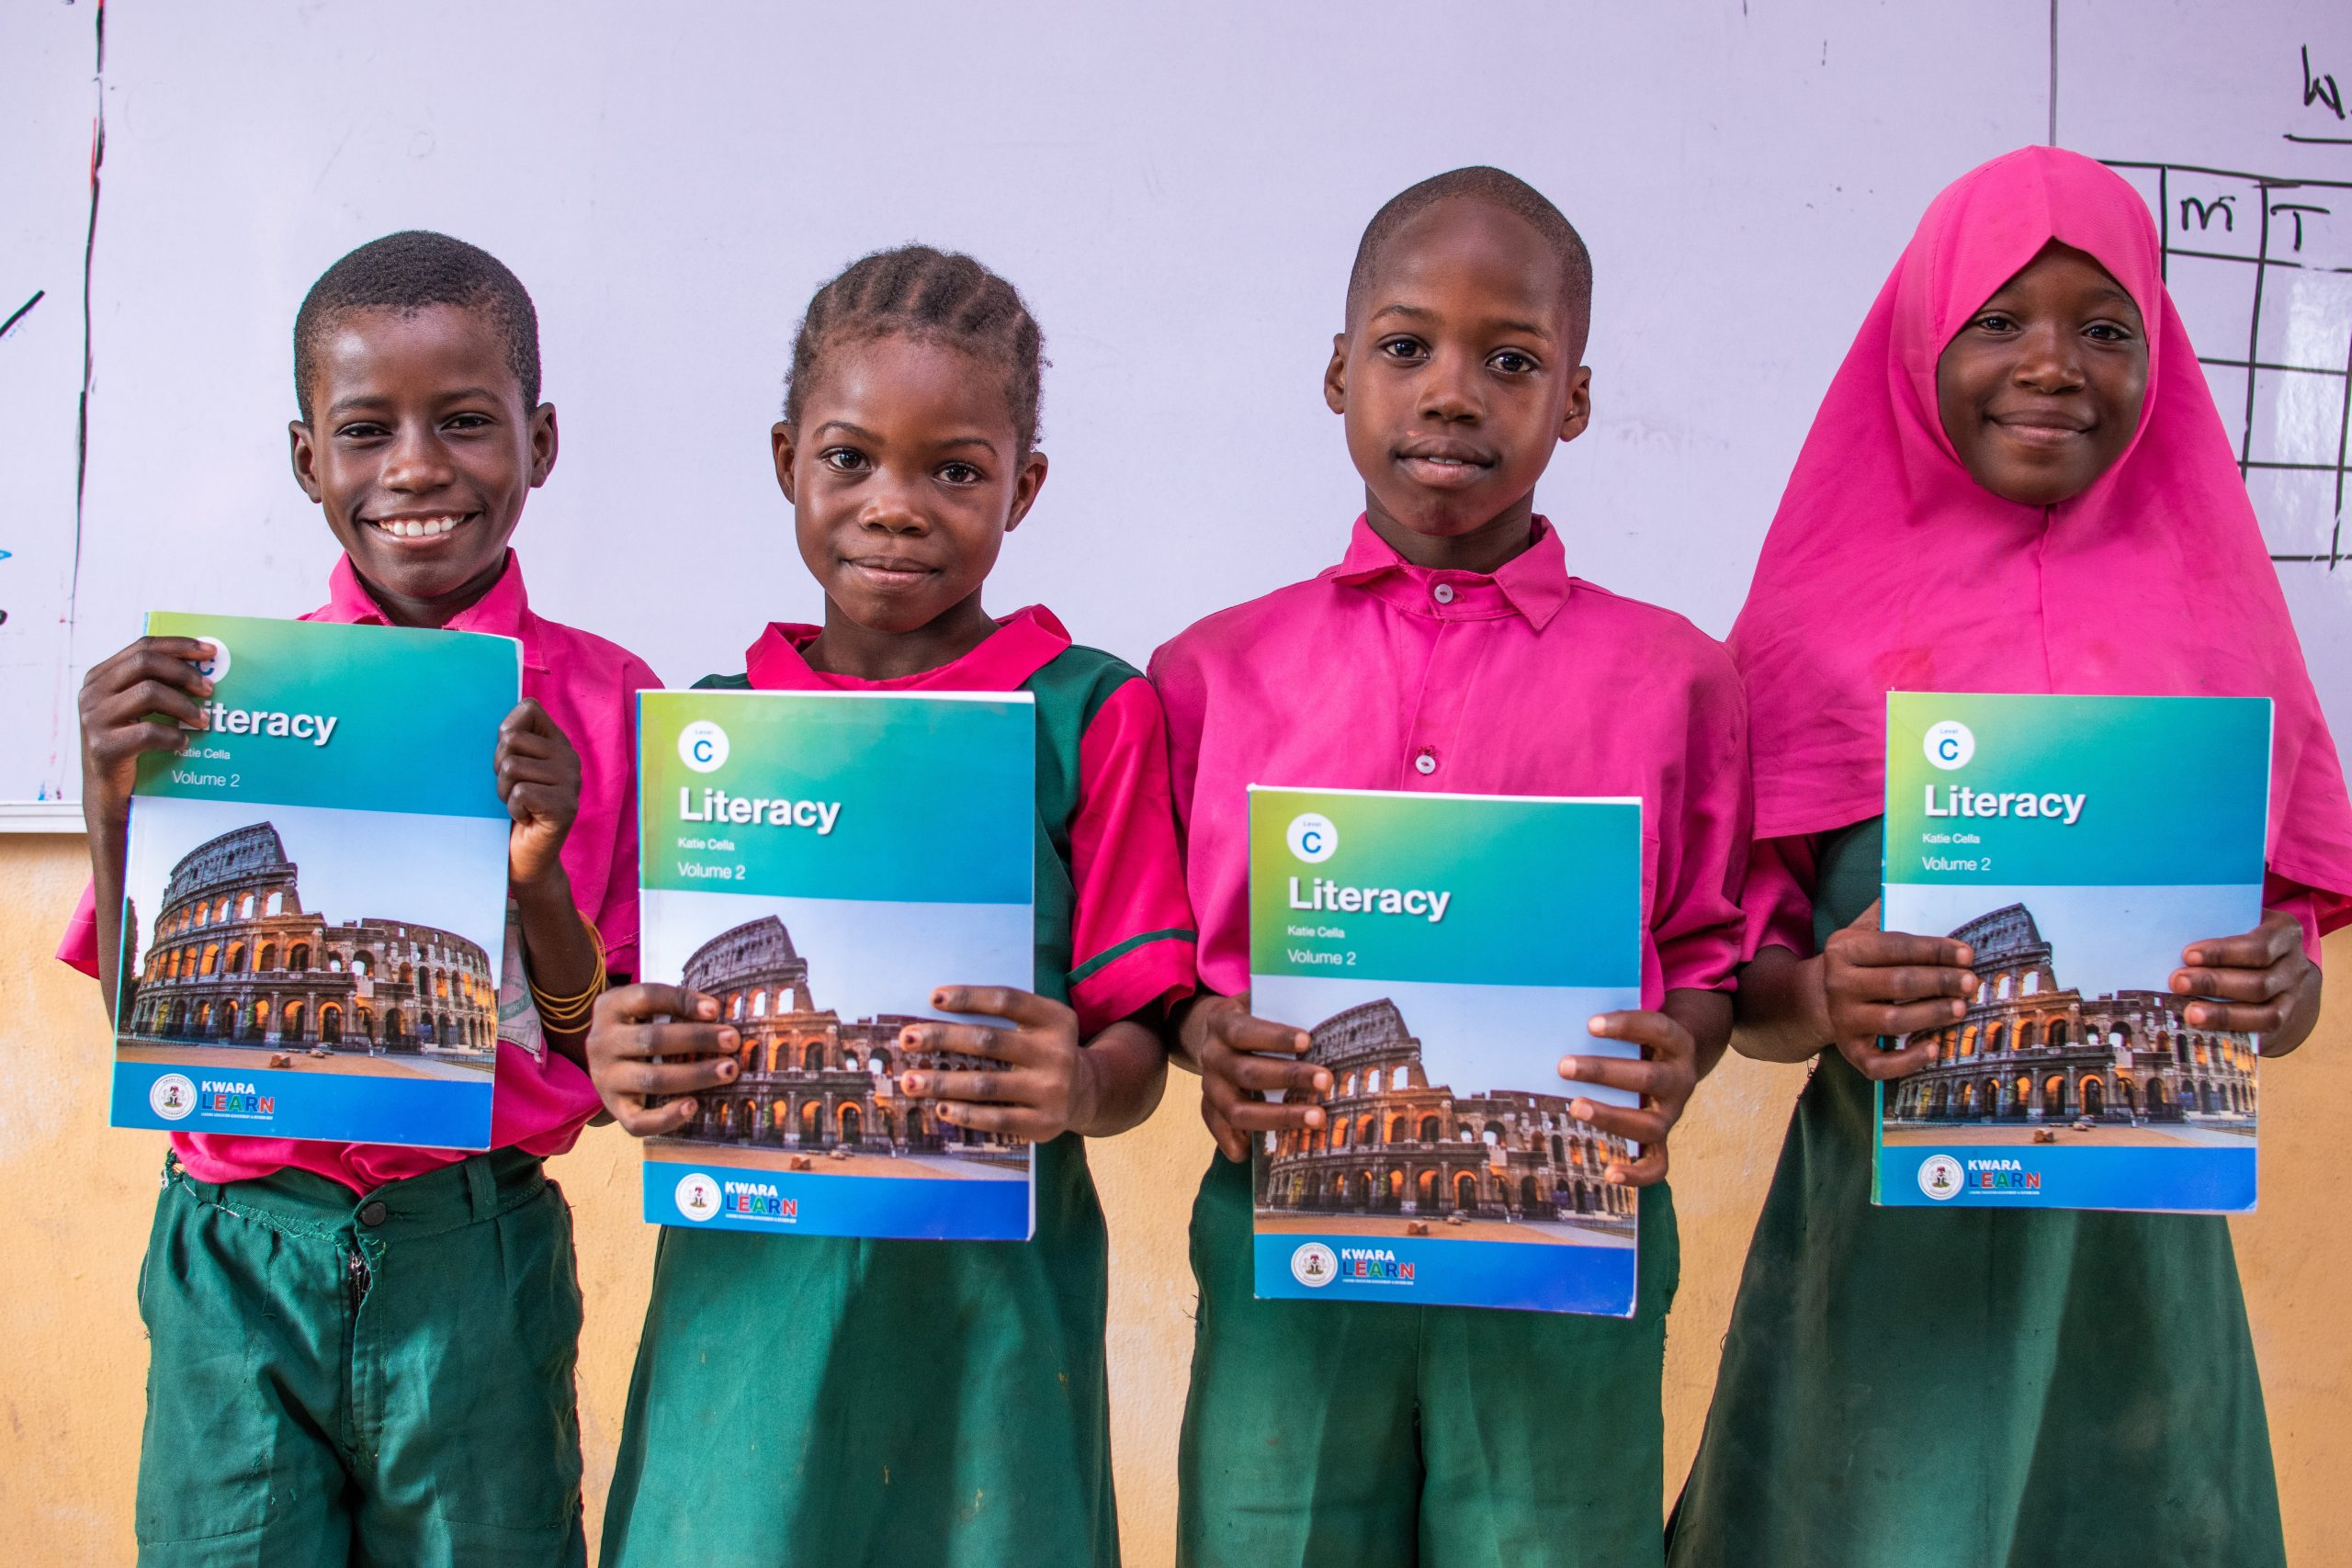 KwaraLEARN pupils happily holding their literacy textbook.